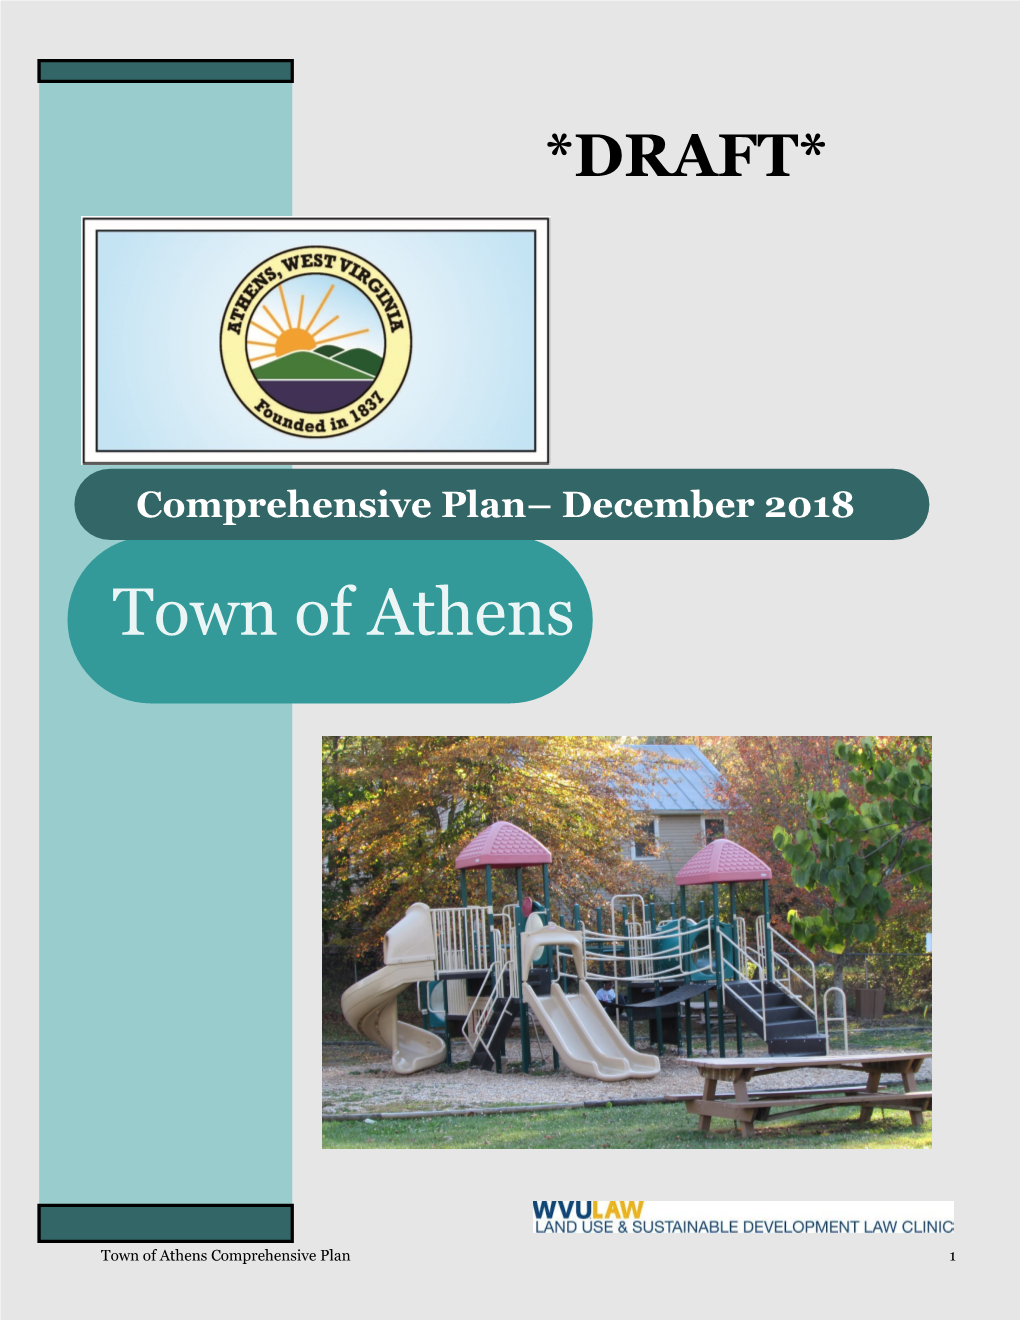 Town of Athens' Vision Statement